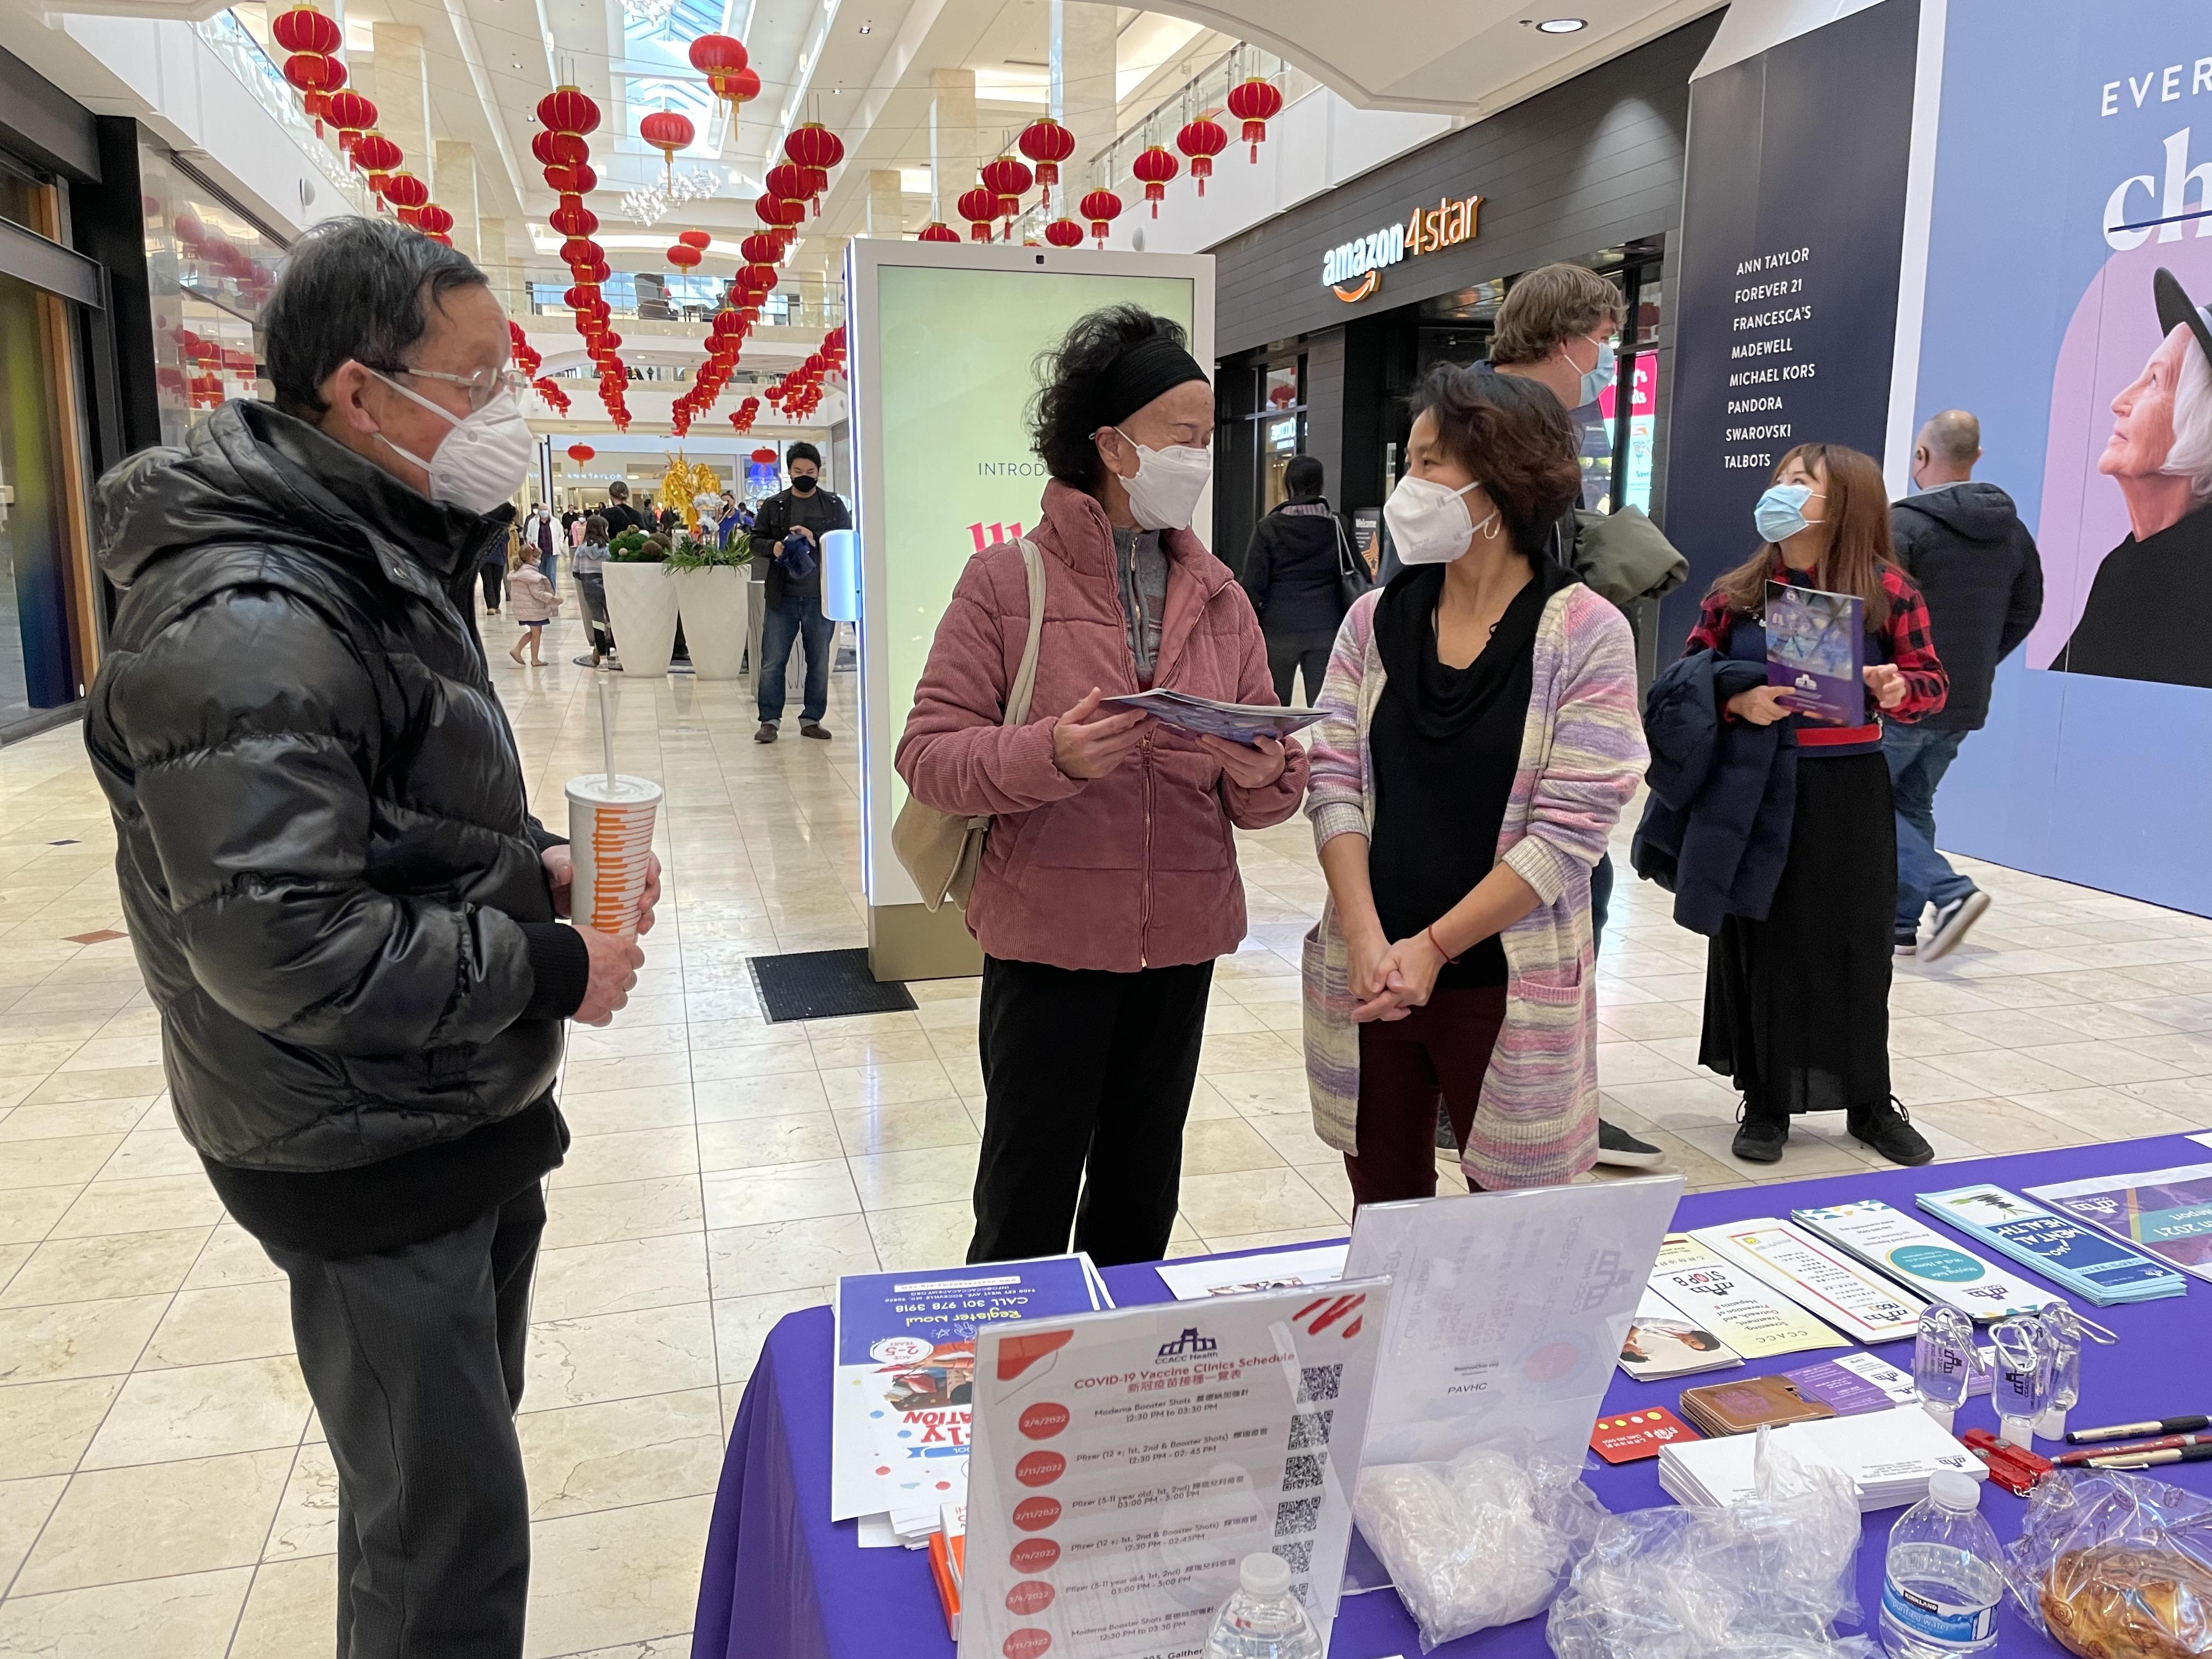 People wearing masks stand at an information booth located in a shopping center